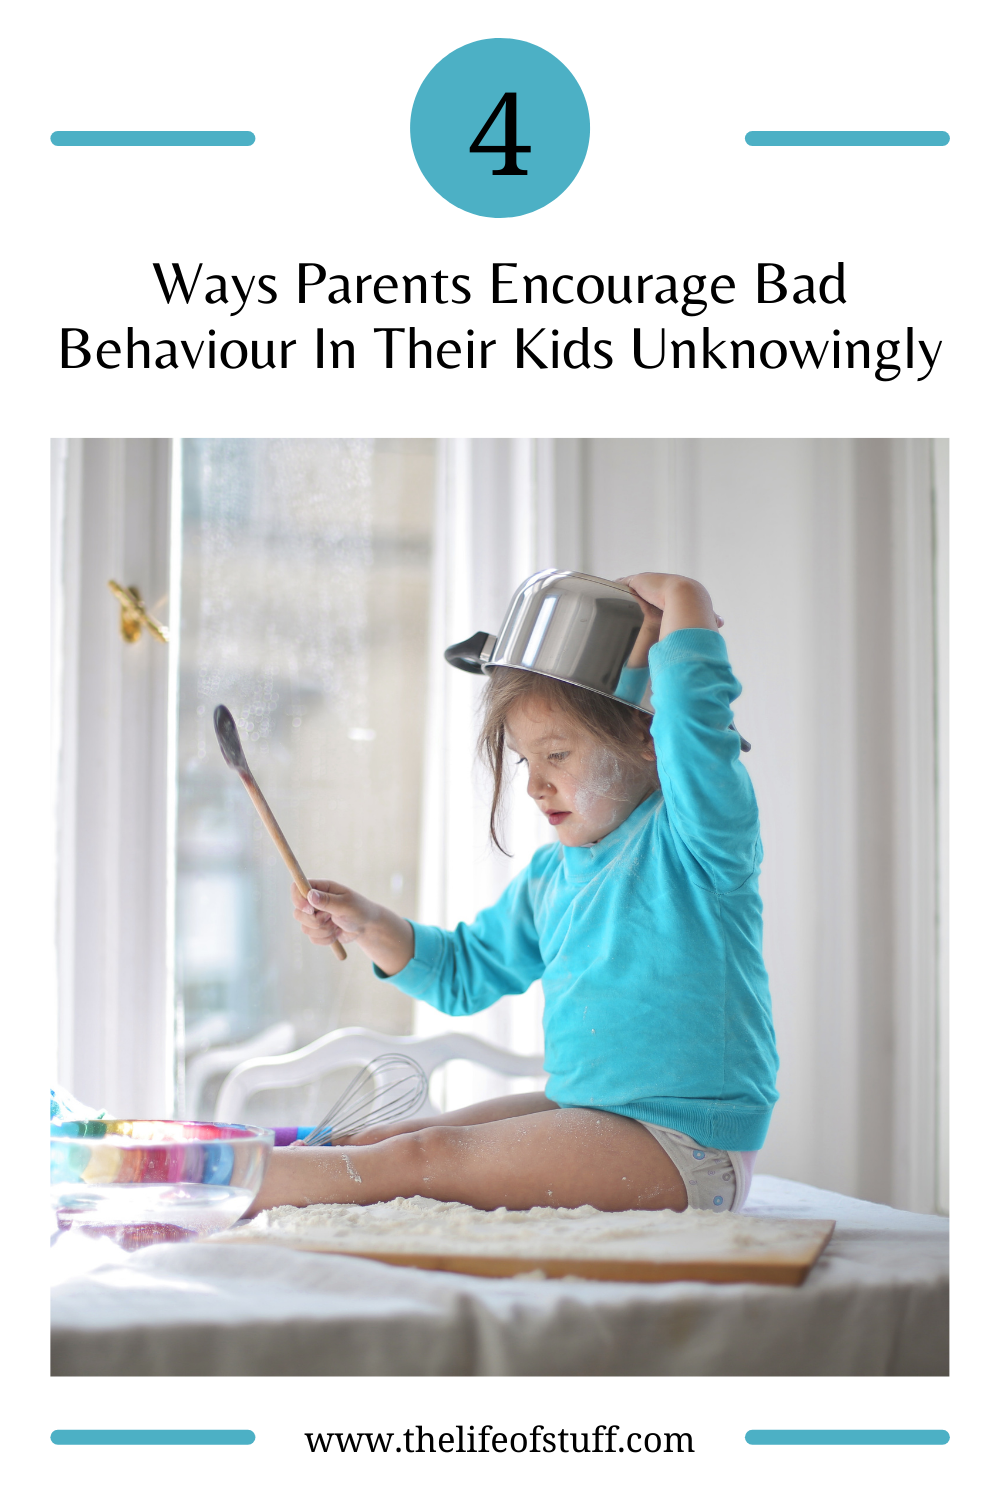 4 Ways Parents Encourage Bad Behaviour In Their Kids Unknowingly - The Life of Stuff